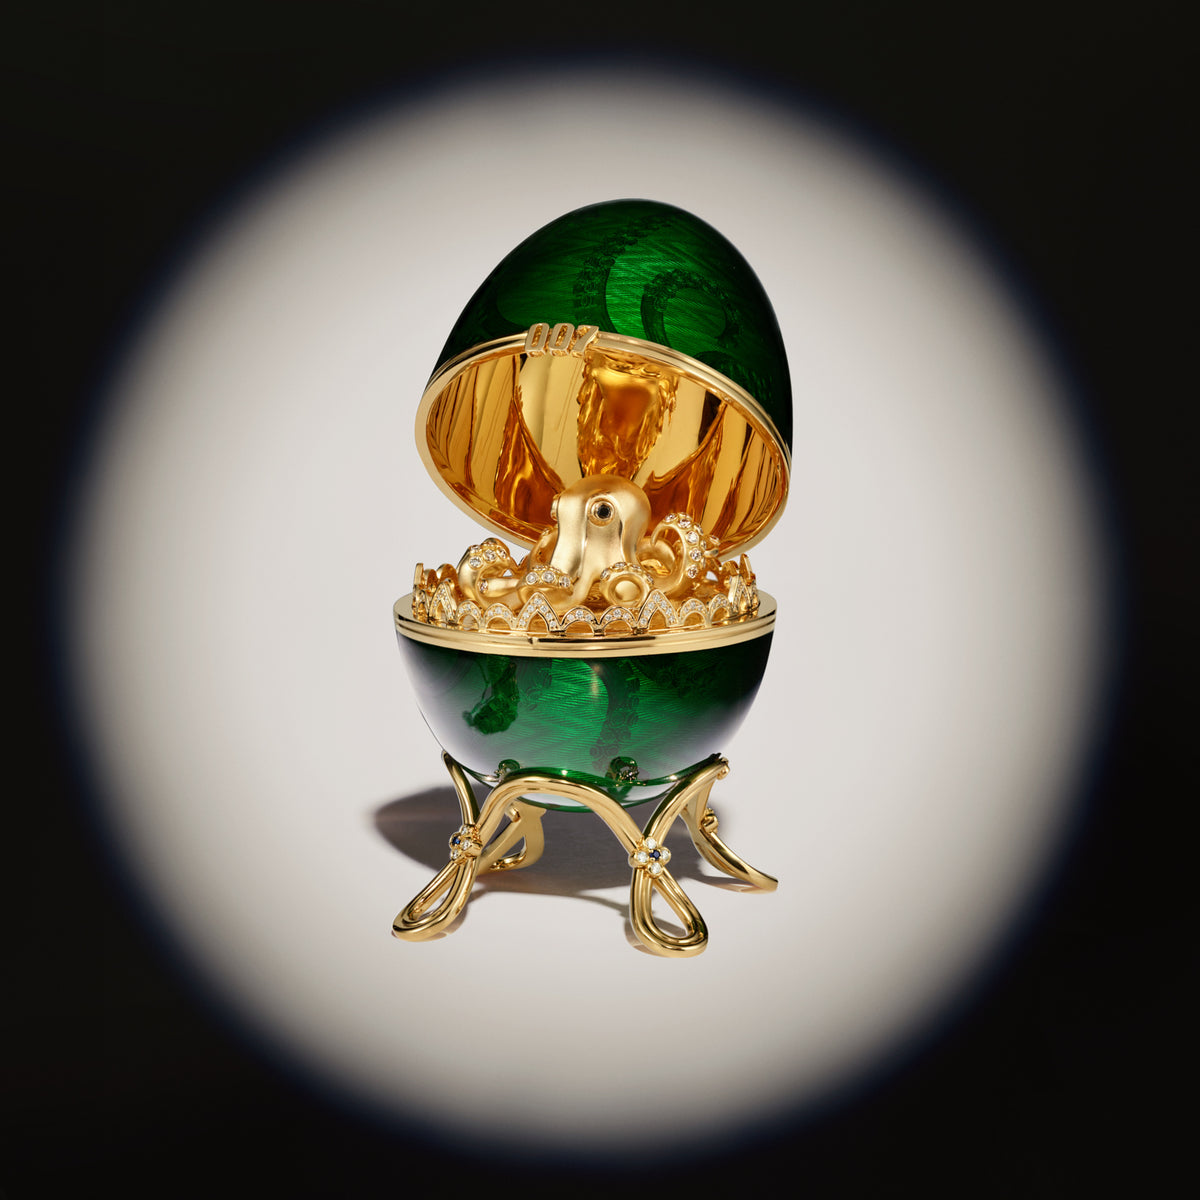 Fabergé x 007 Octopussy Egg Objet - Numbered Edition